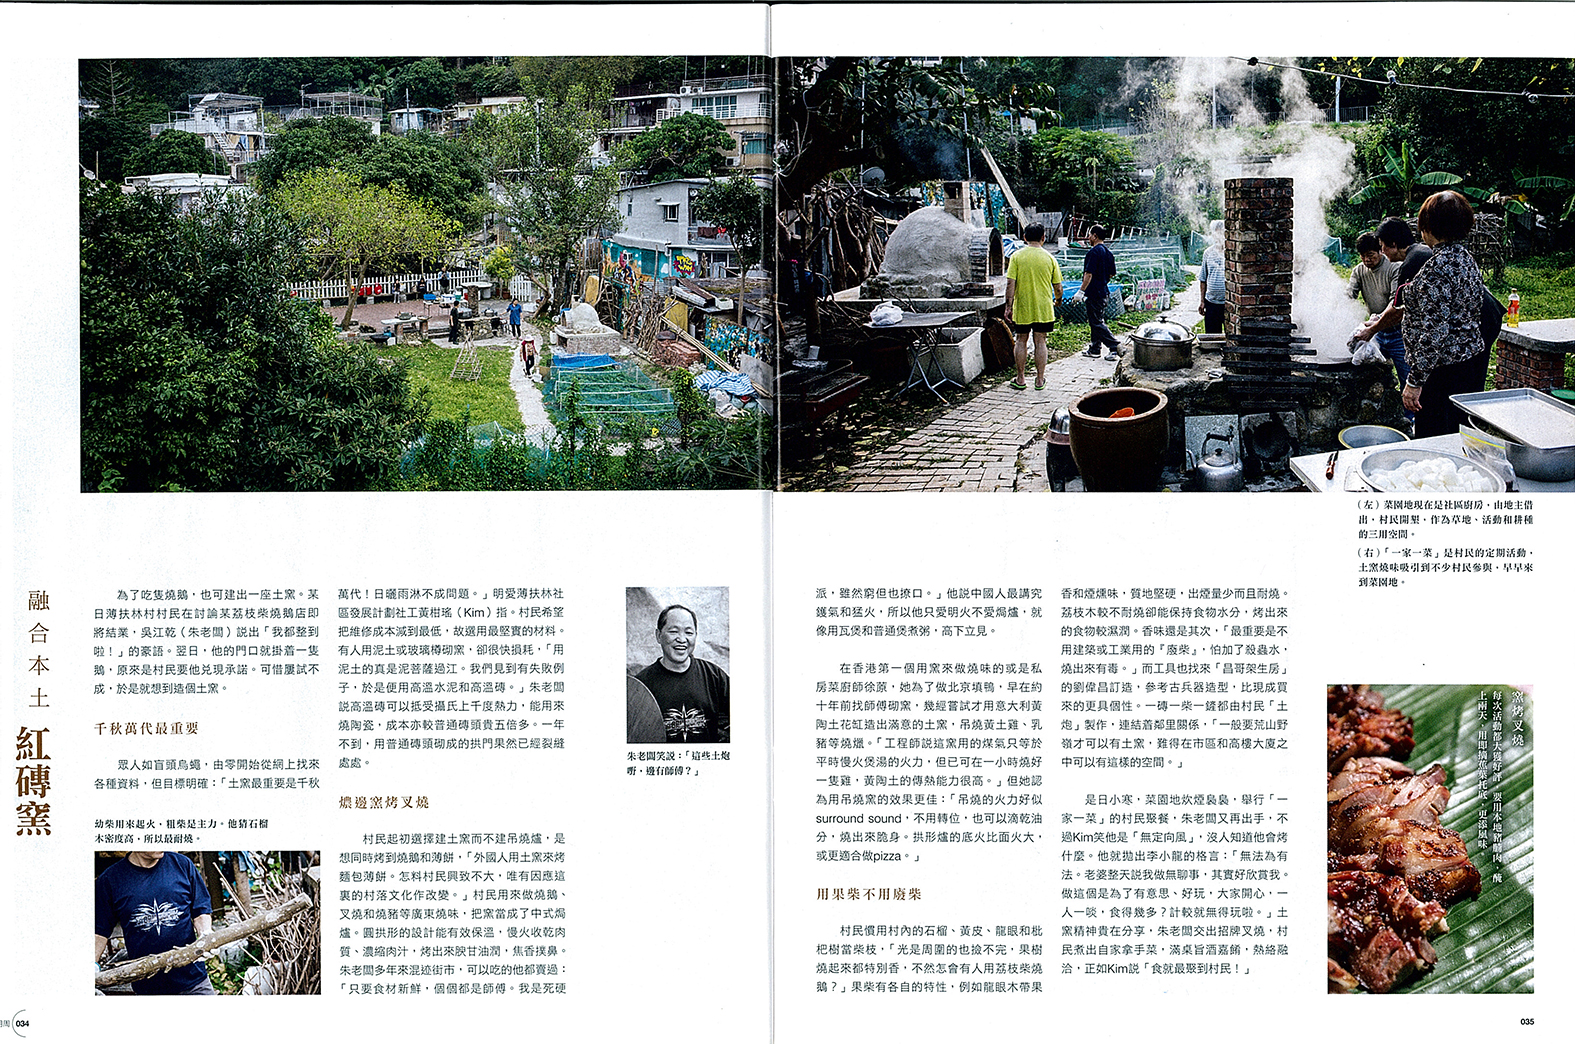 Ming Pao Weekly reports on the kiln